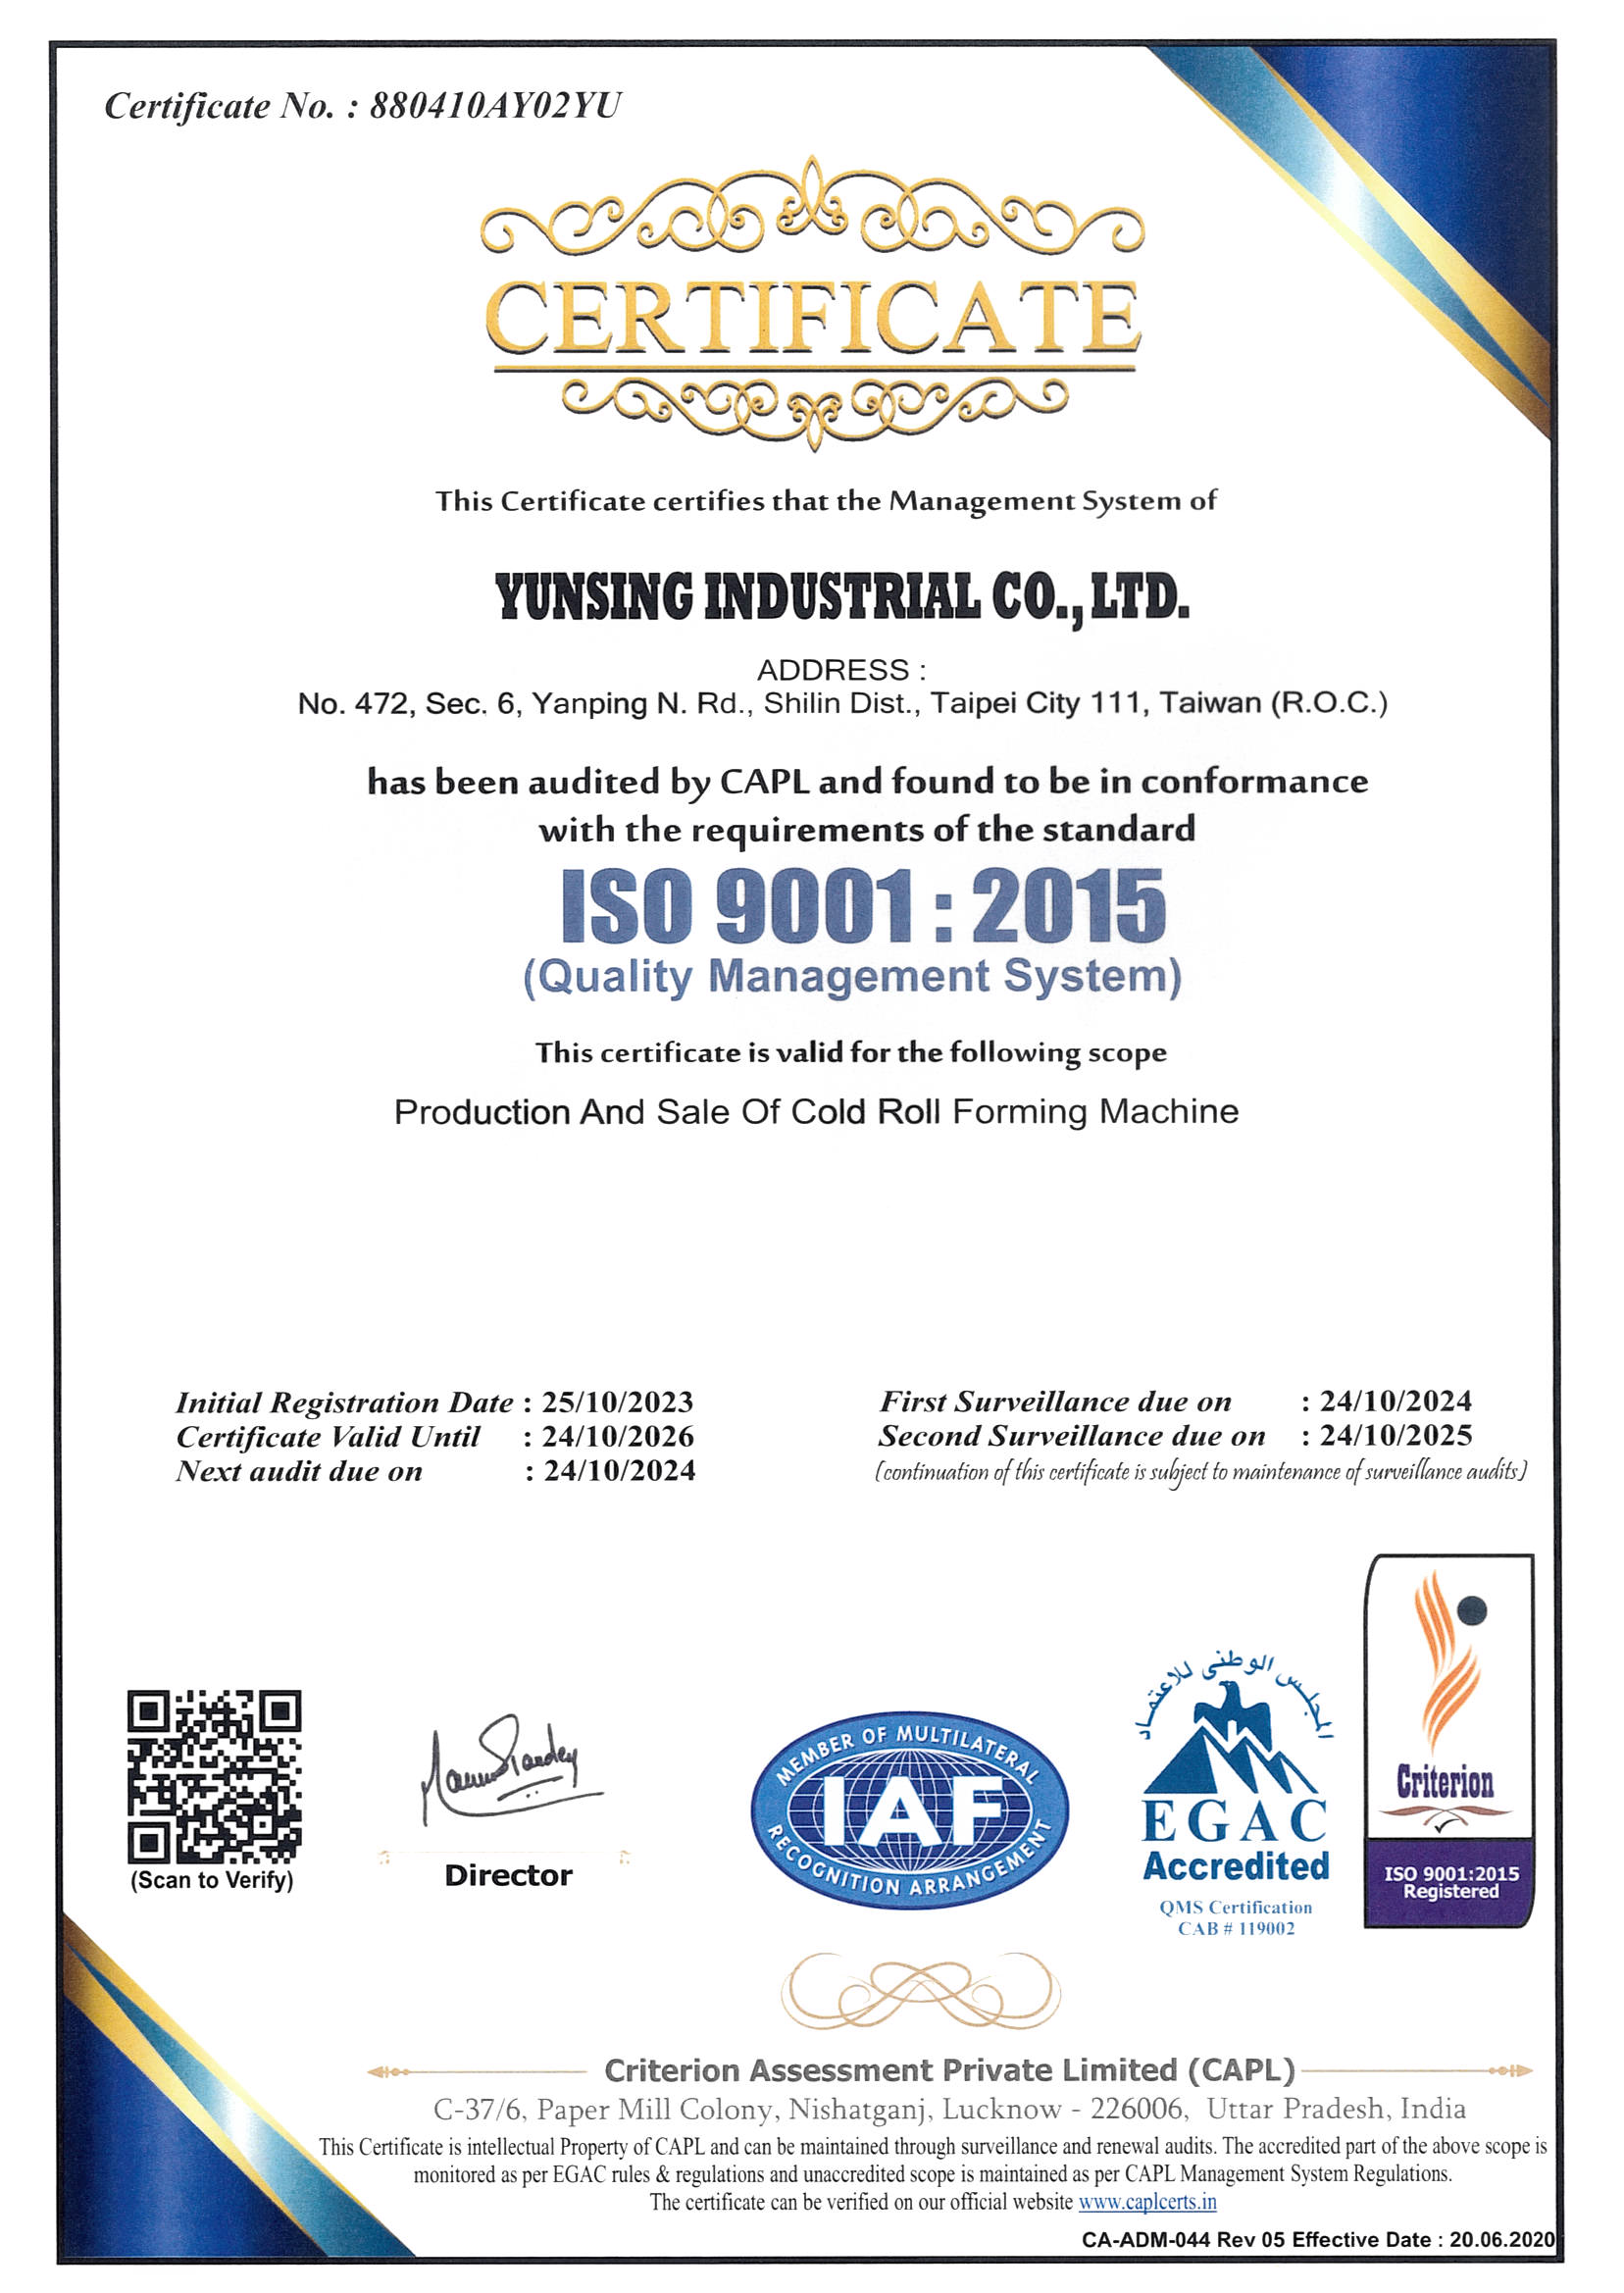 ISO 9001:2015 certification of YunSing